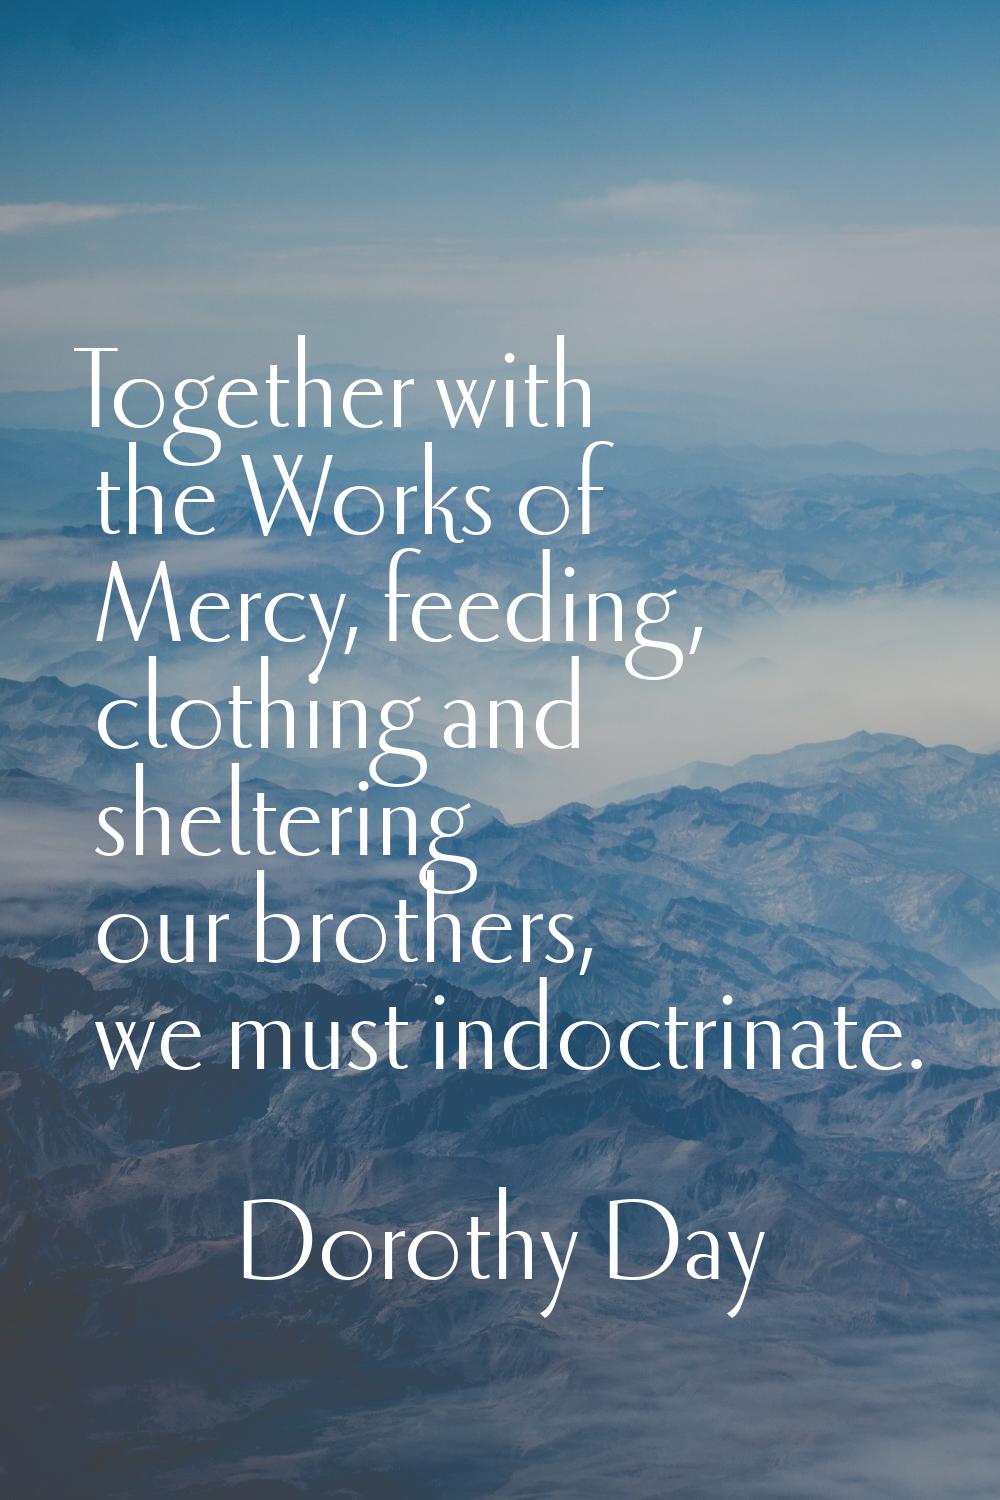 Together with the Works of Mercy, feeding, clothing and sheltering our brothers, we must indoctrina